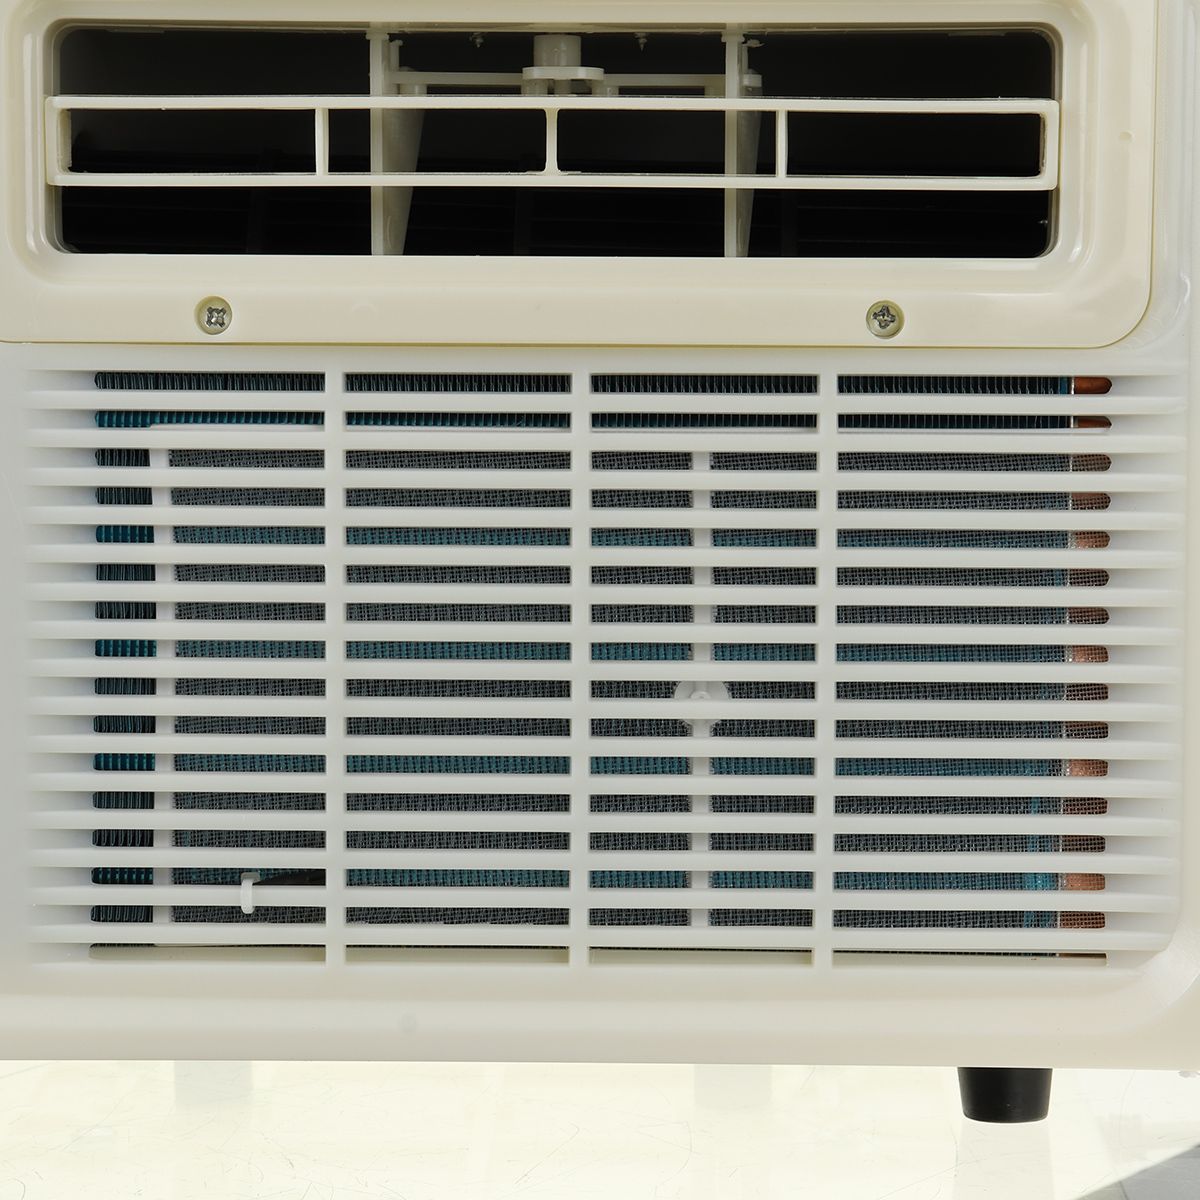 220V110V-04HP-Window-Type-Mobile-Negative-Ion-Function-Air-Conditioner-With-Remote-Control-1742615